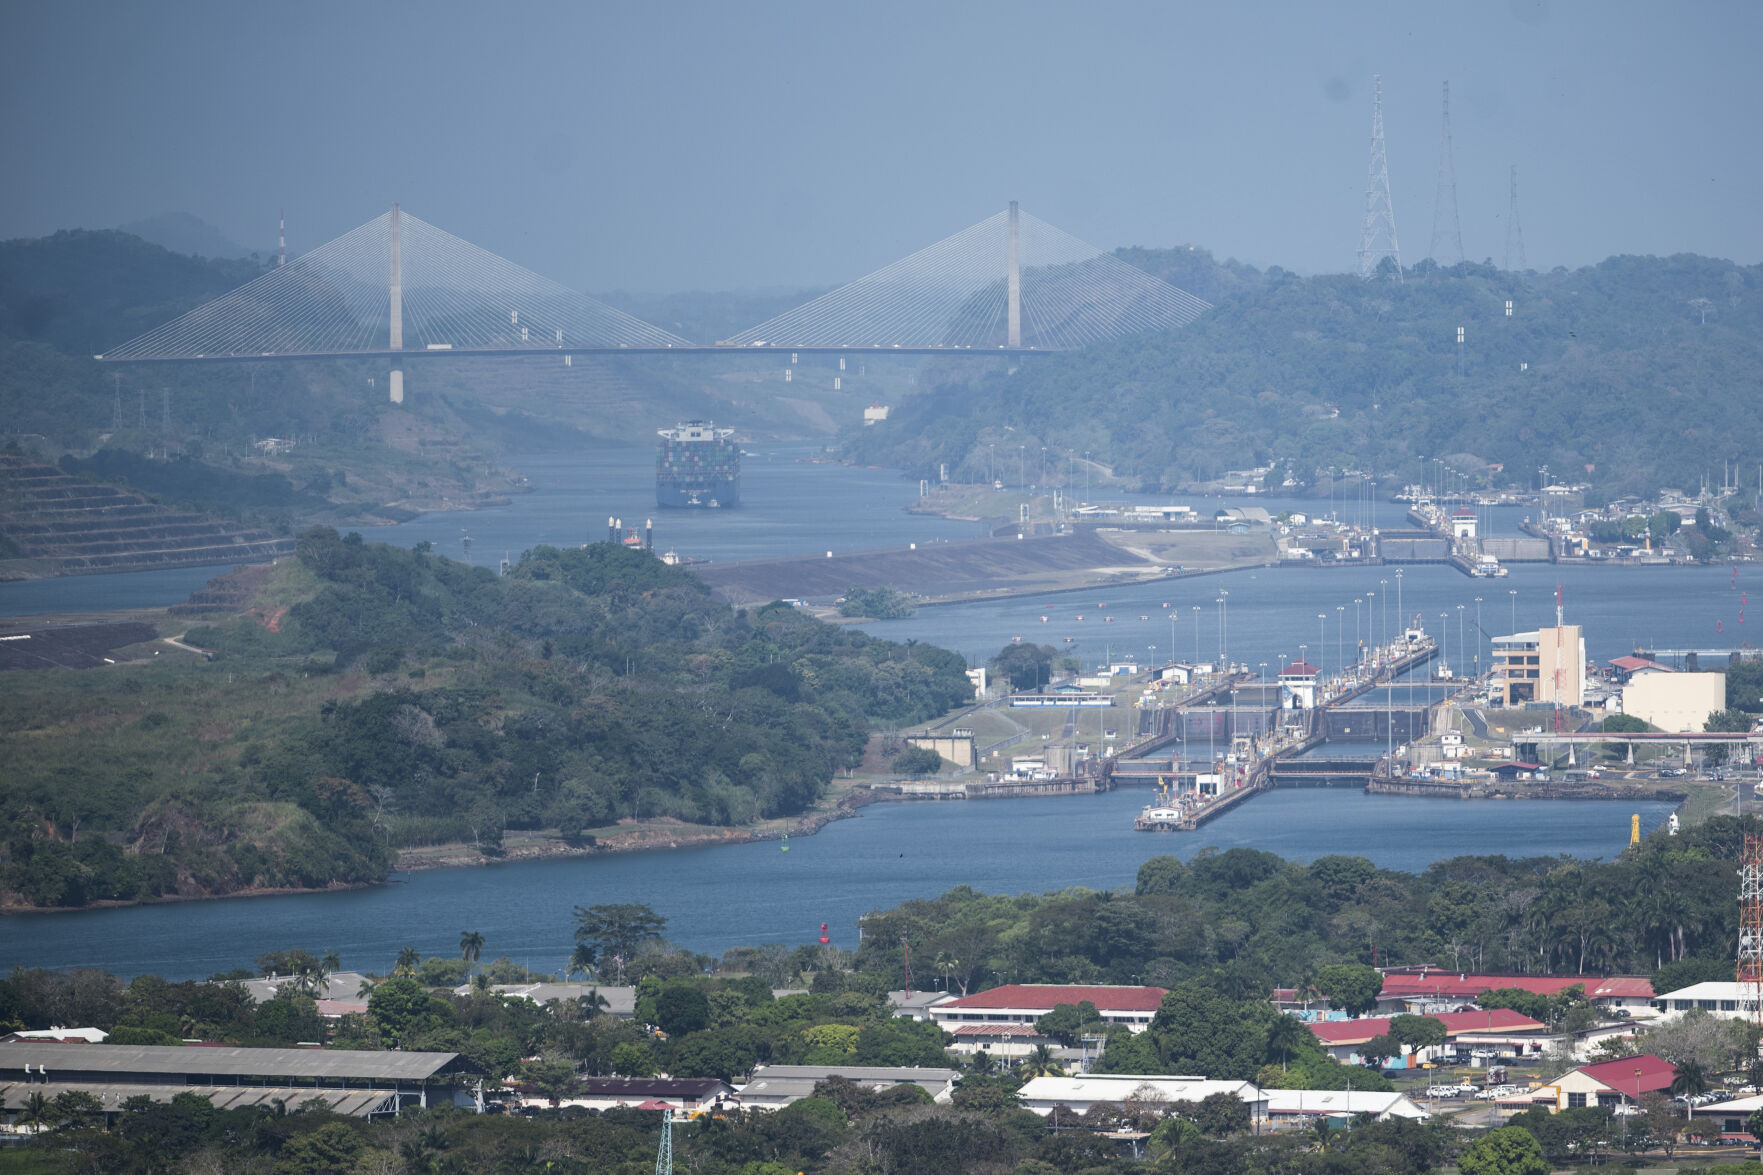 <p>A cargo ship waits near the Centennial Bridge for transit through the Panama Canal locks, in Panama City, Wednesday, Jan. 17, 2024. A severe drought that began last year has forced authorities to slash ship crossings by 36% in the Panama Canal, one of the world’s most important trade routes. (AP Photo/Agustin Herrera)</p>   PHOTO CREDIT: Agustin Herrera 